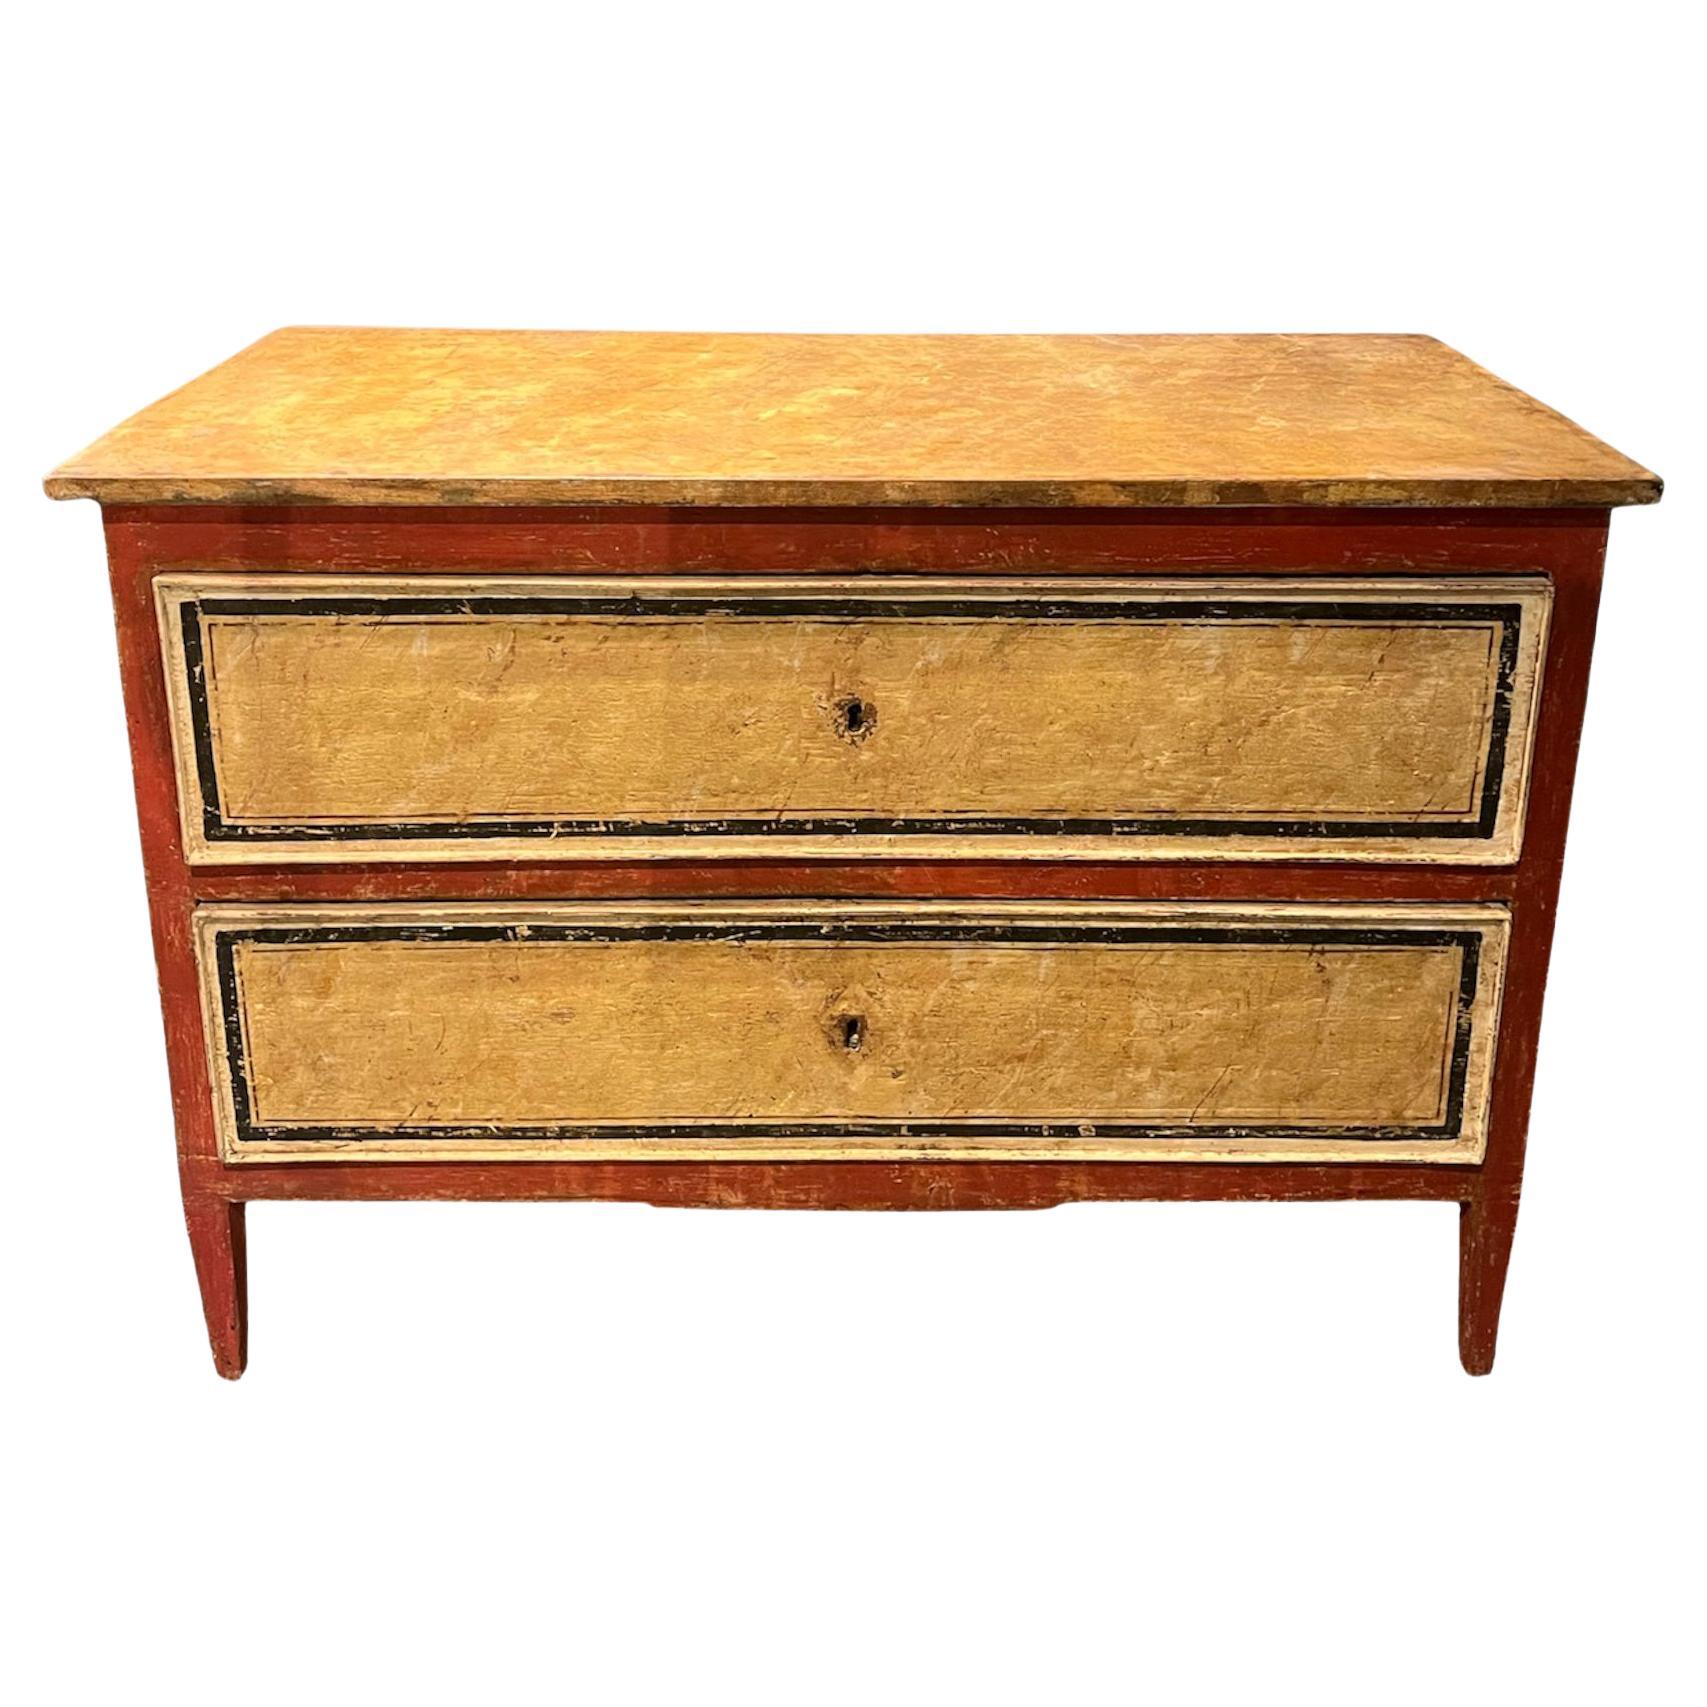 Painted chest of drawers in fir wood 18th century For Sale